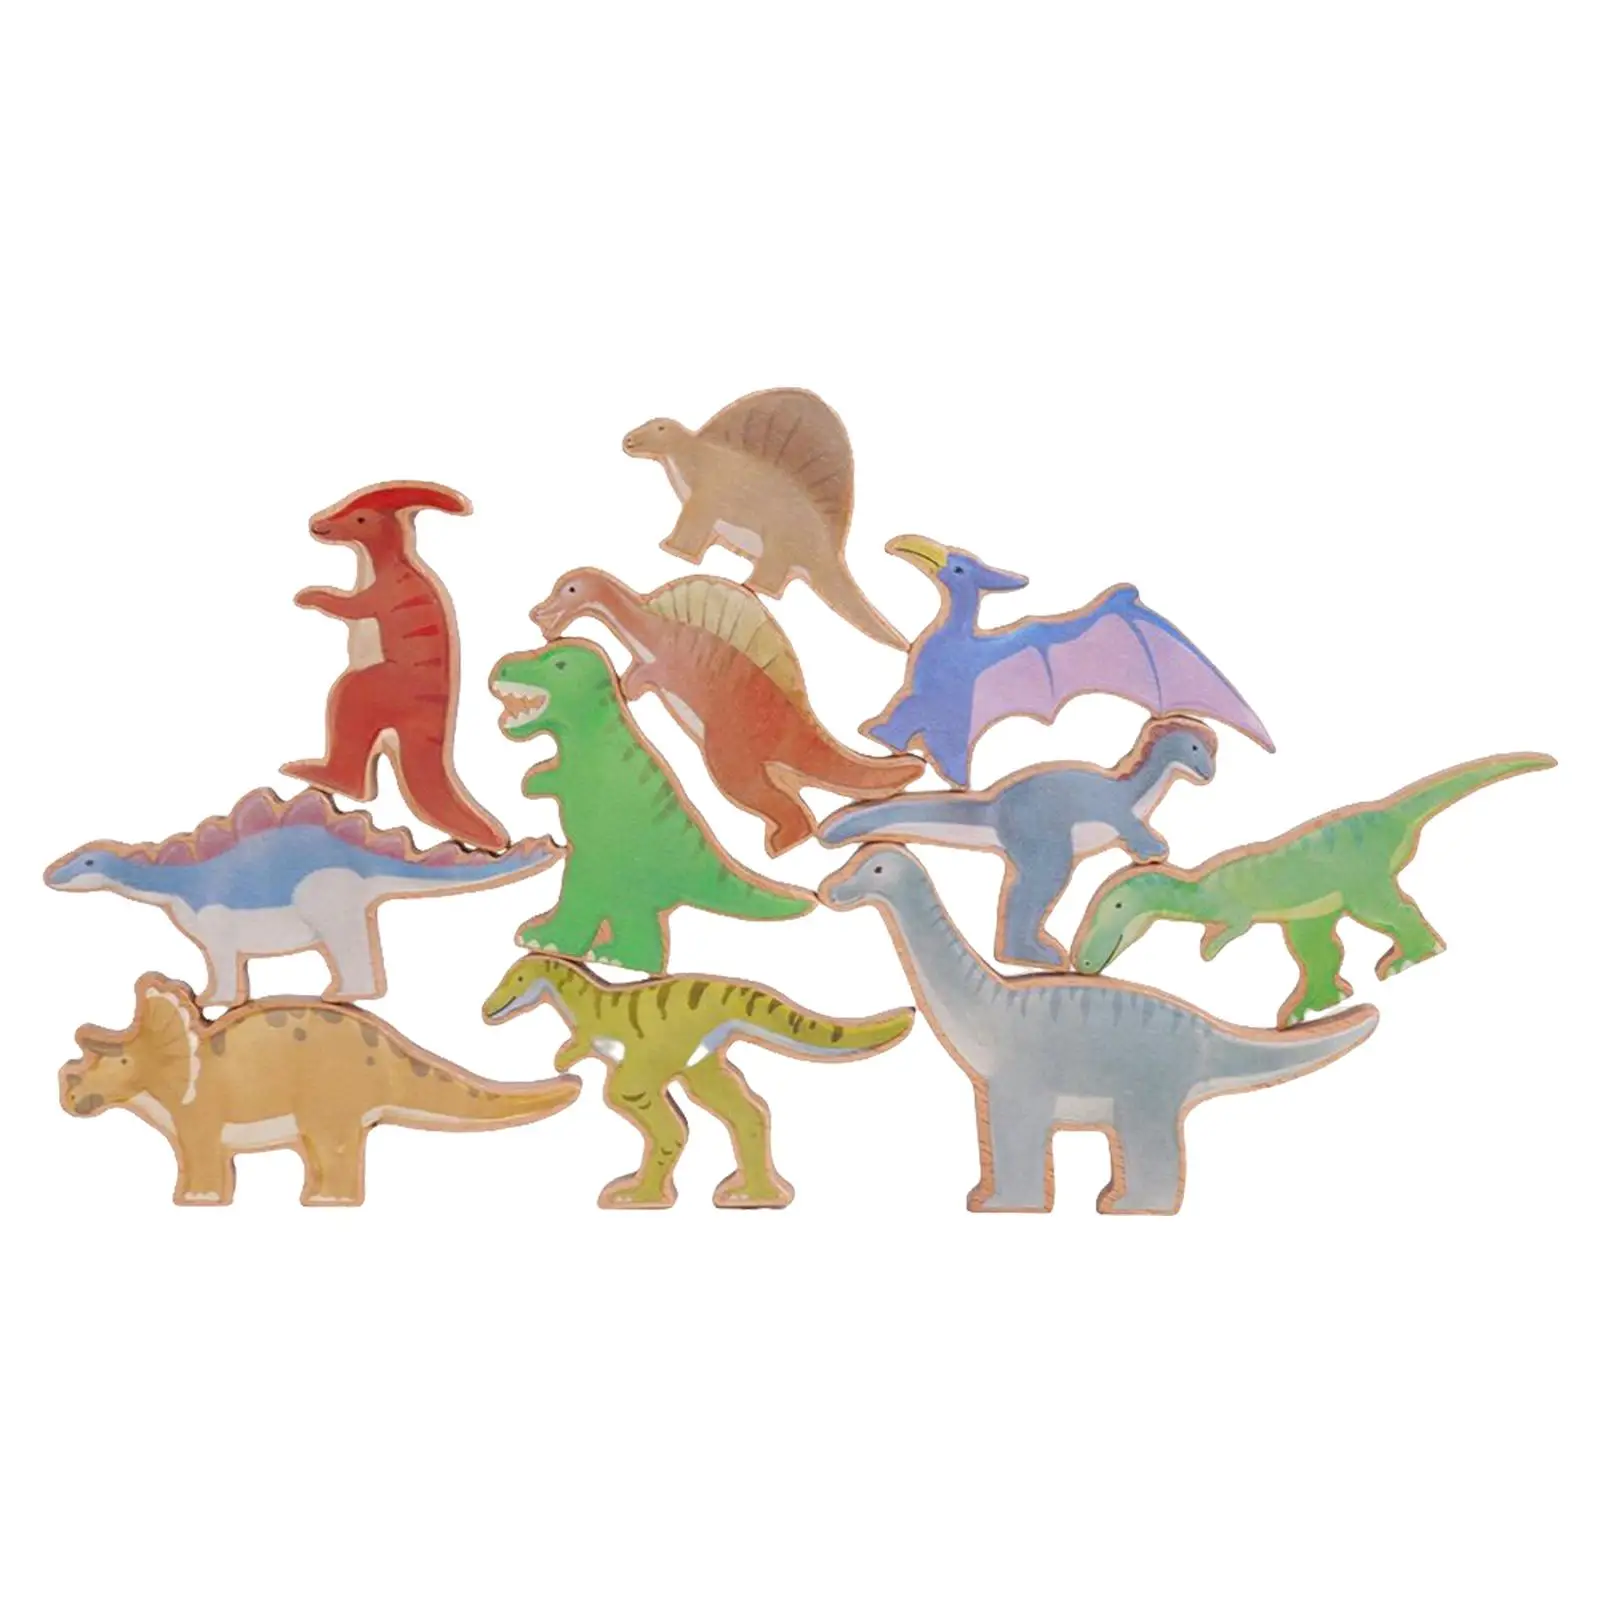 Wood Dinosaurs Balance Game Learning Building Toys Funny for Girls Boys Toddler Gifts